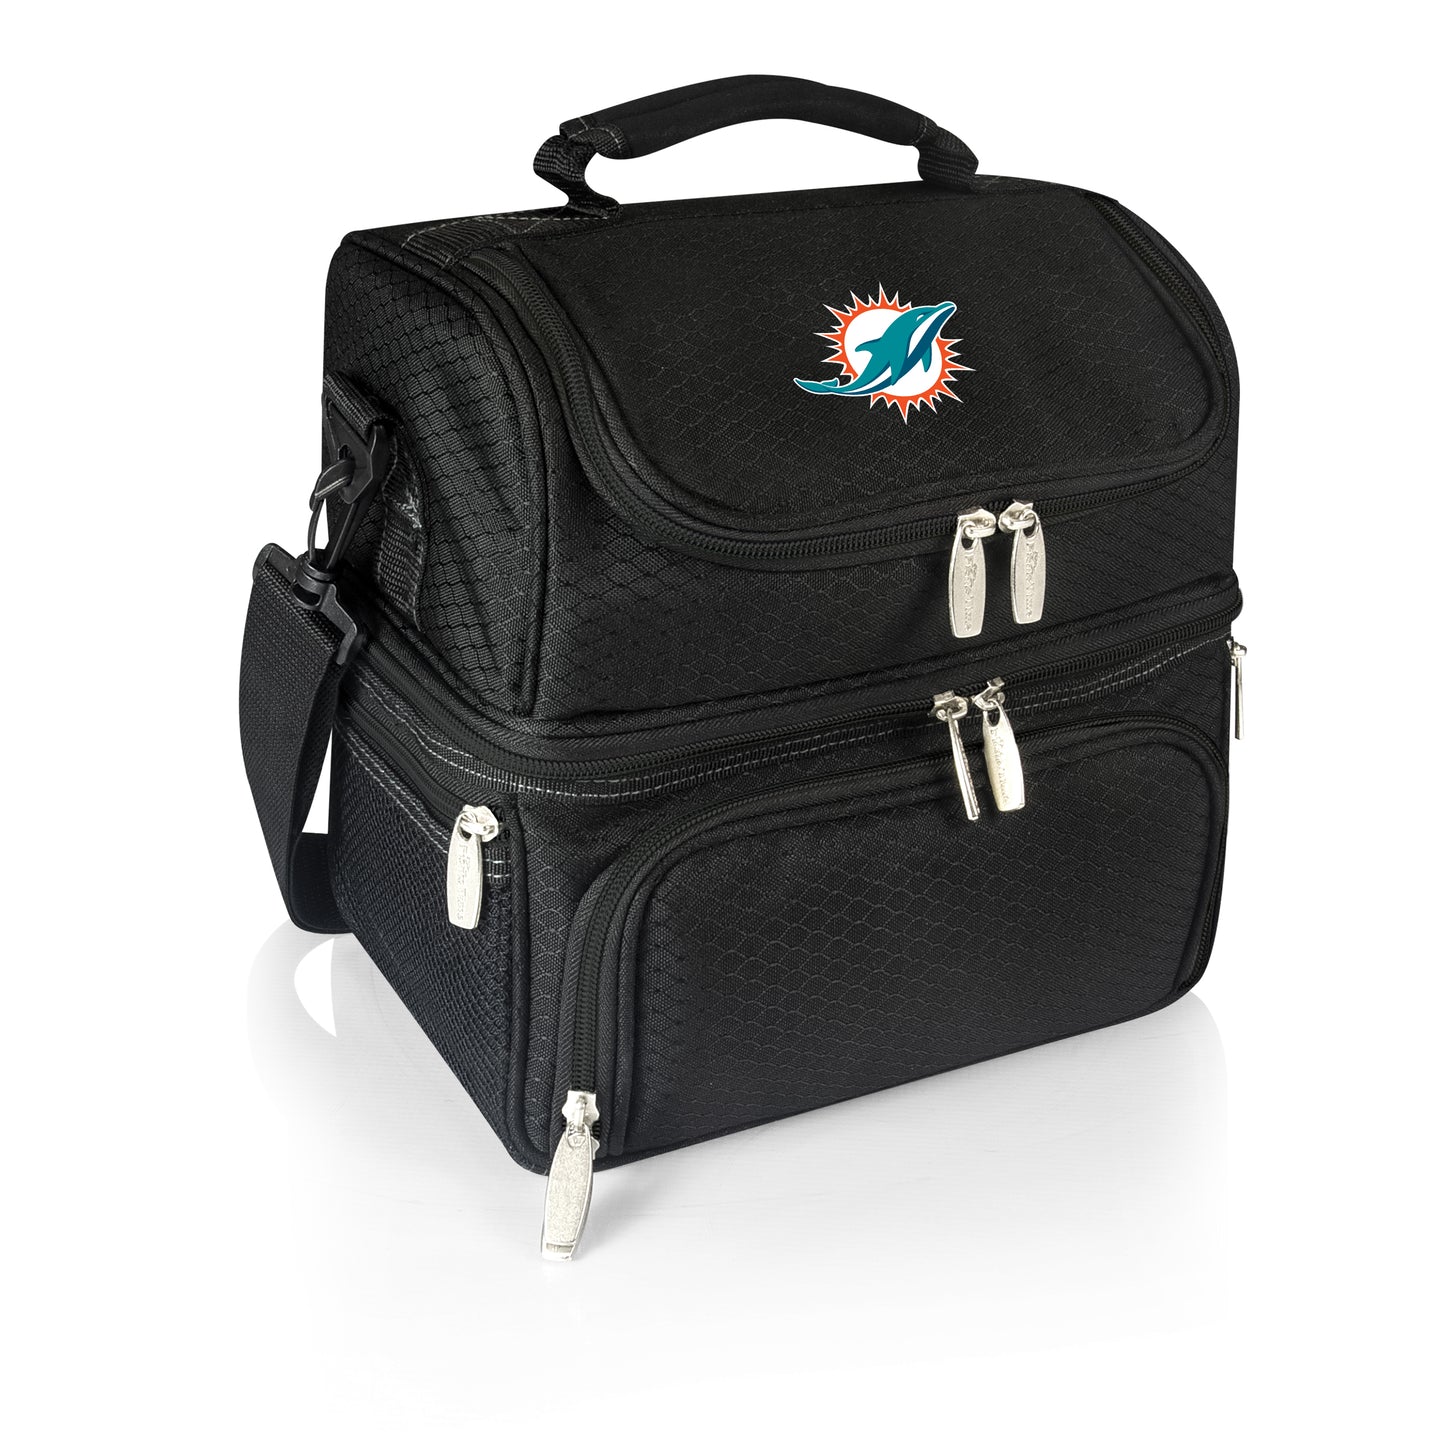 Miami Dolphins - Pranzo Lunch Cooler Bag